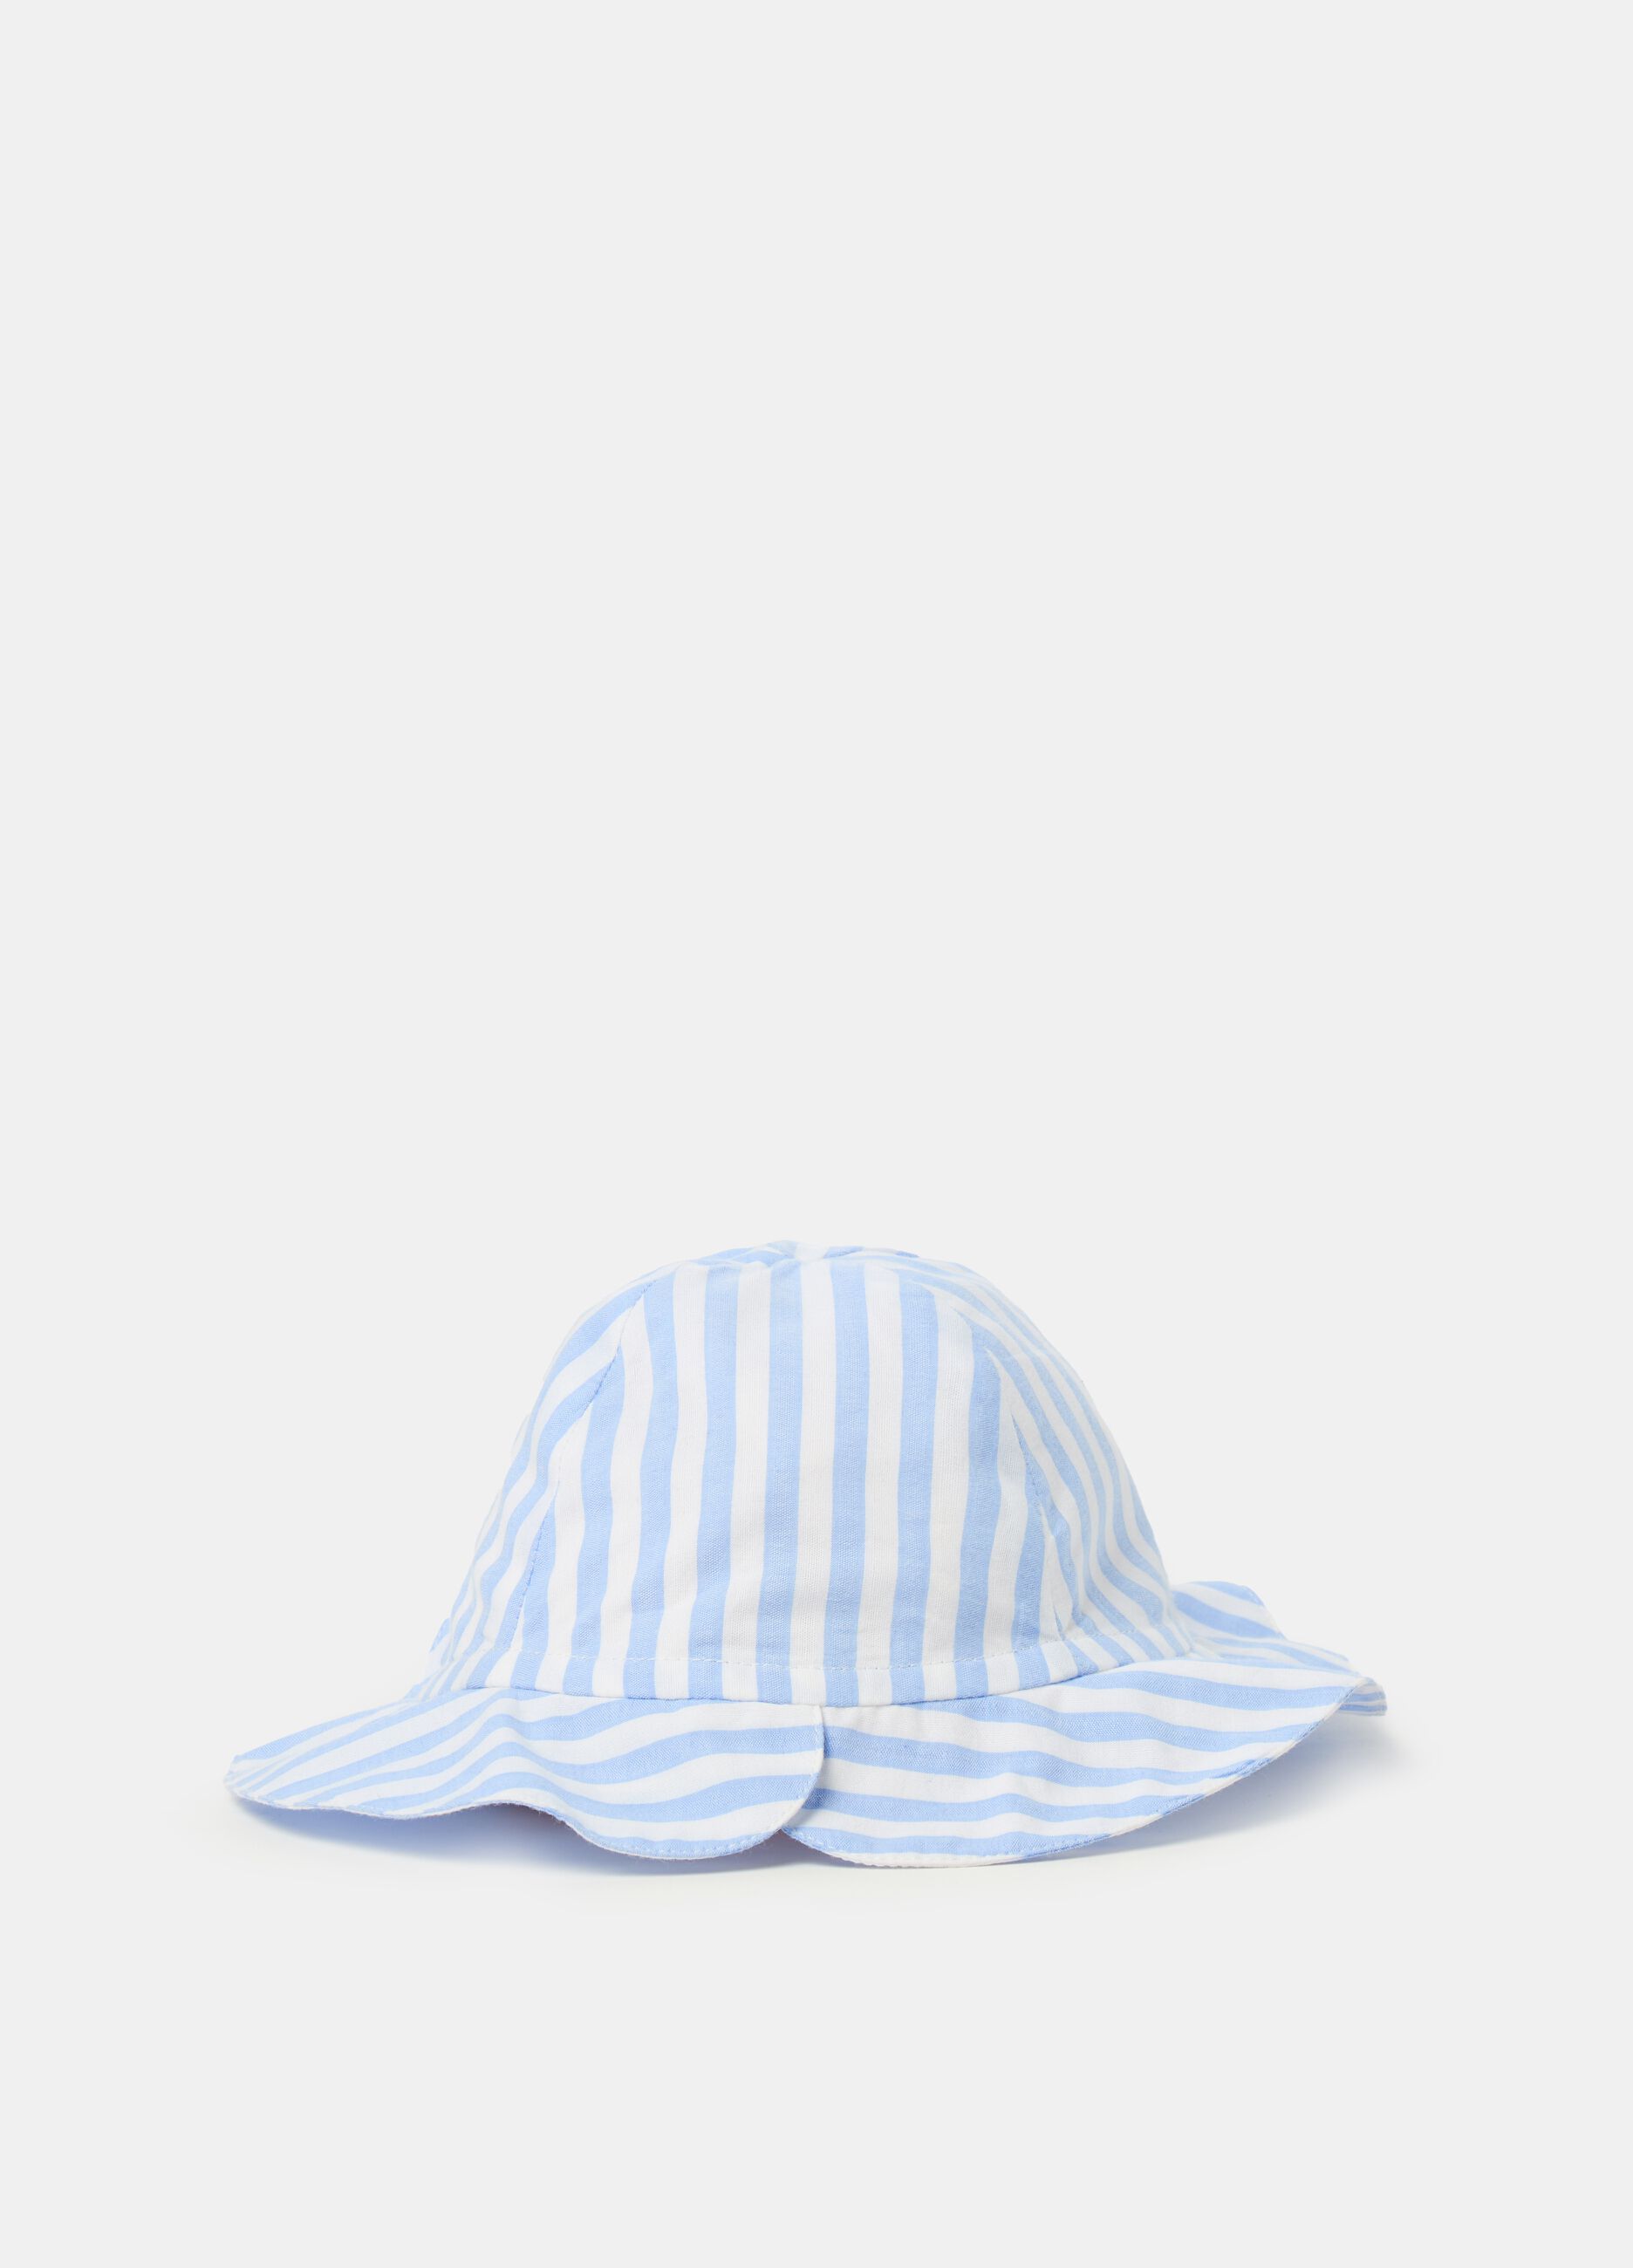 Cotton hat with striped pattern